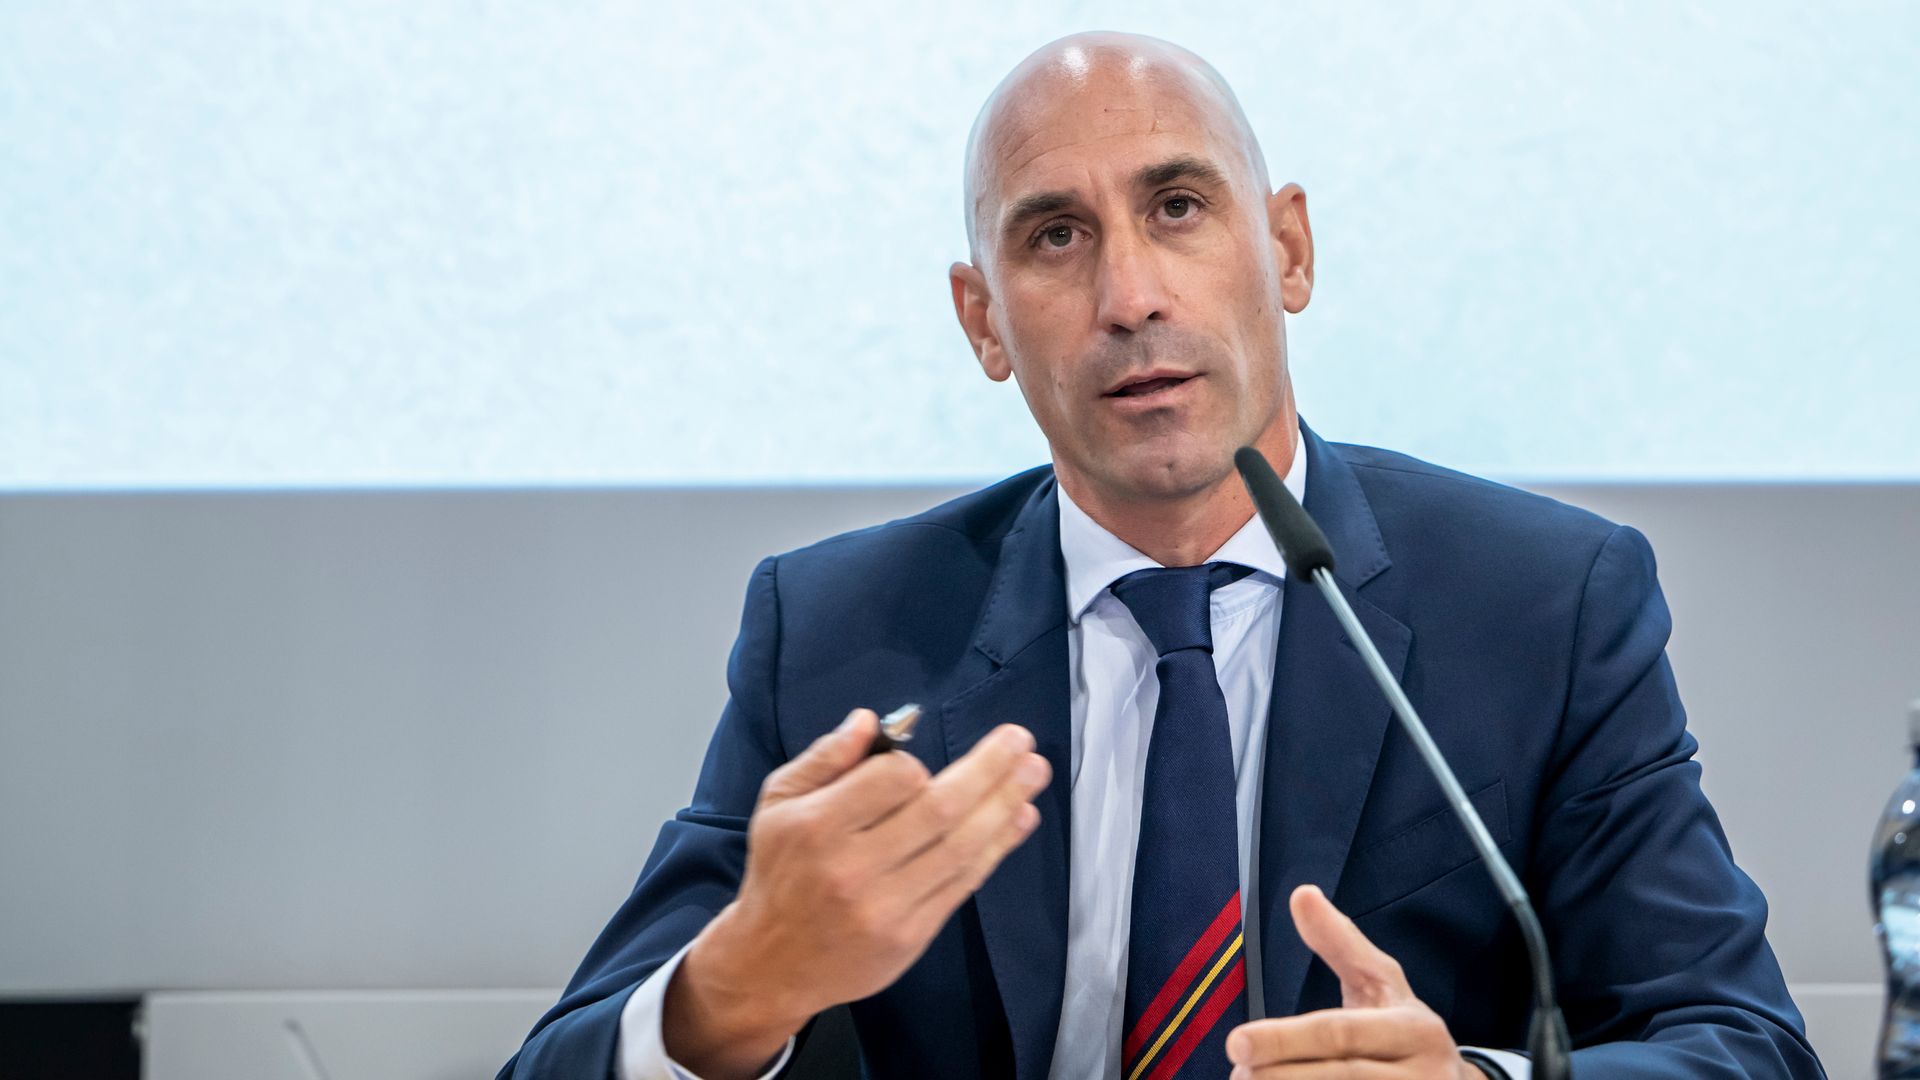 Rubiales resigns as Spanish FA president over Hermoso kissing row